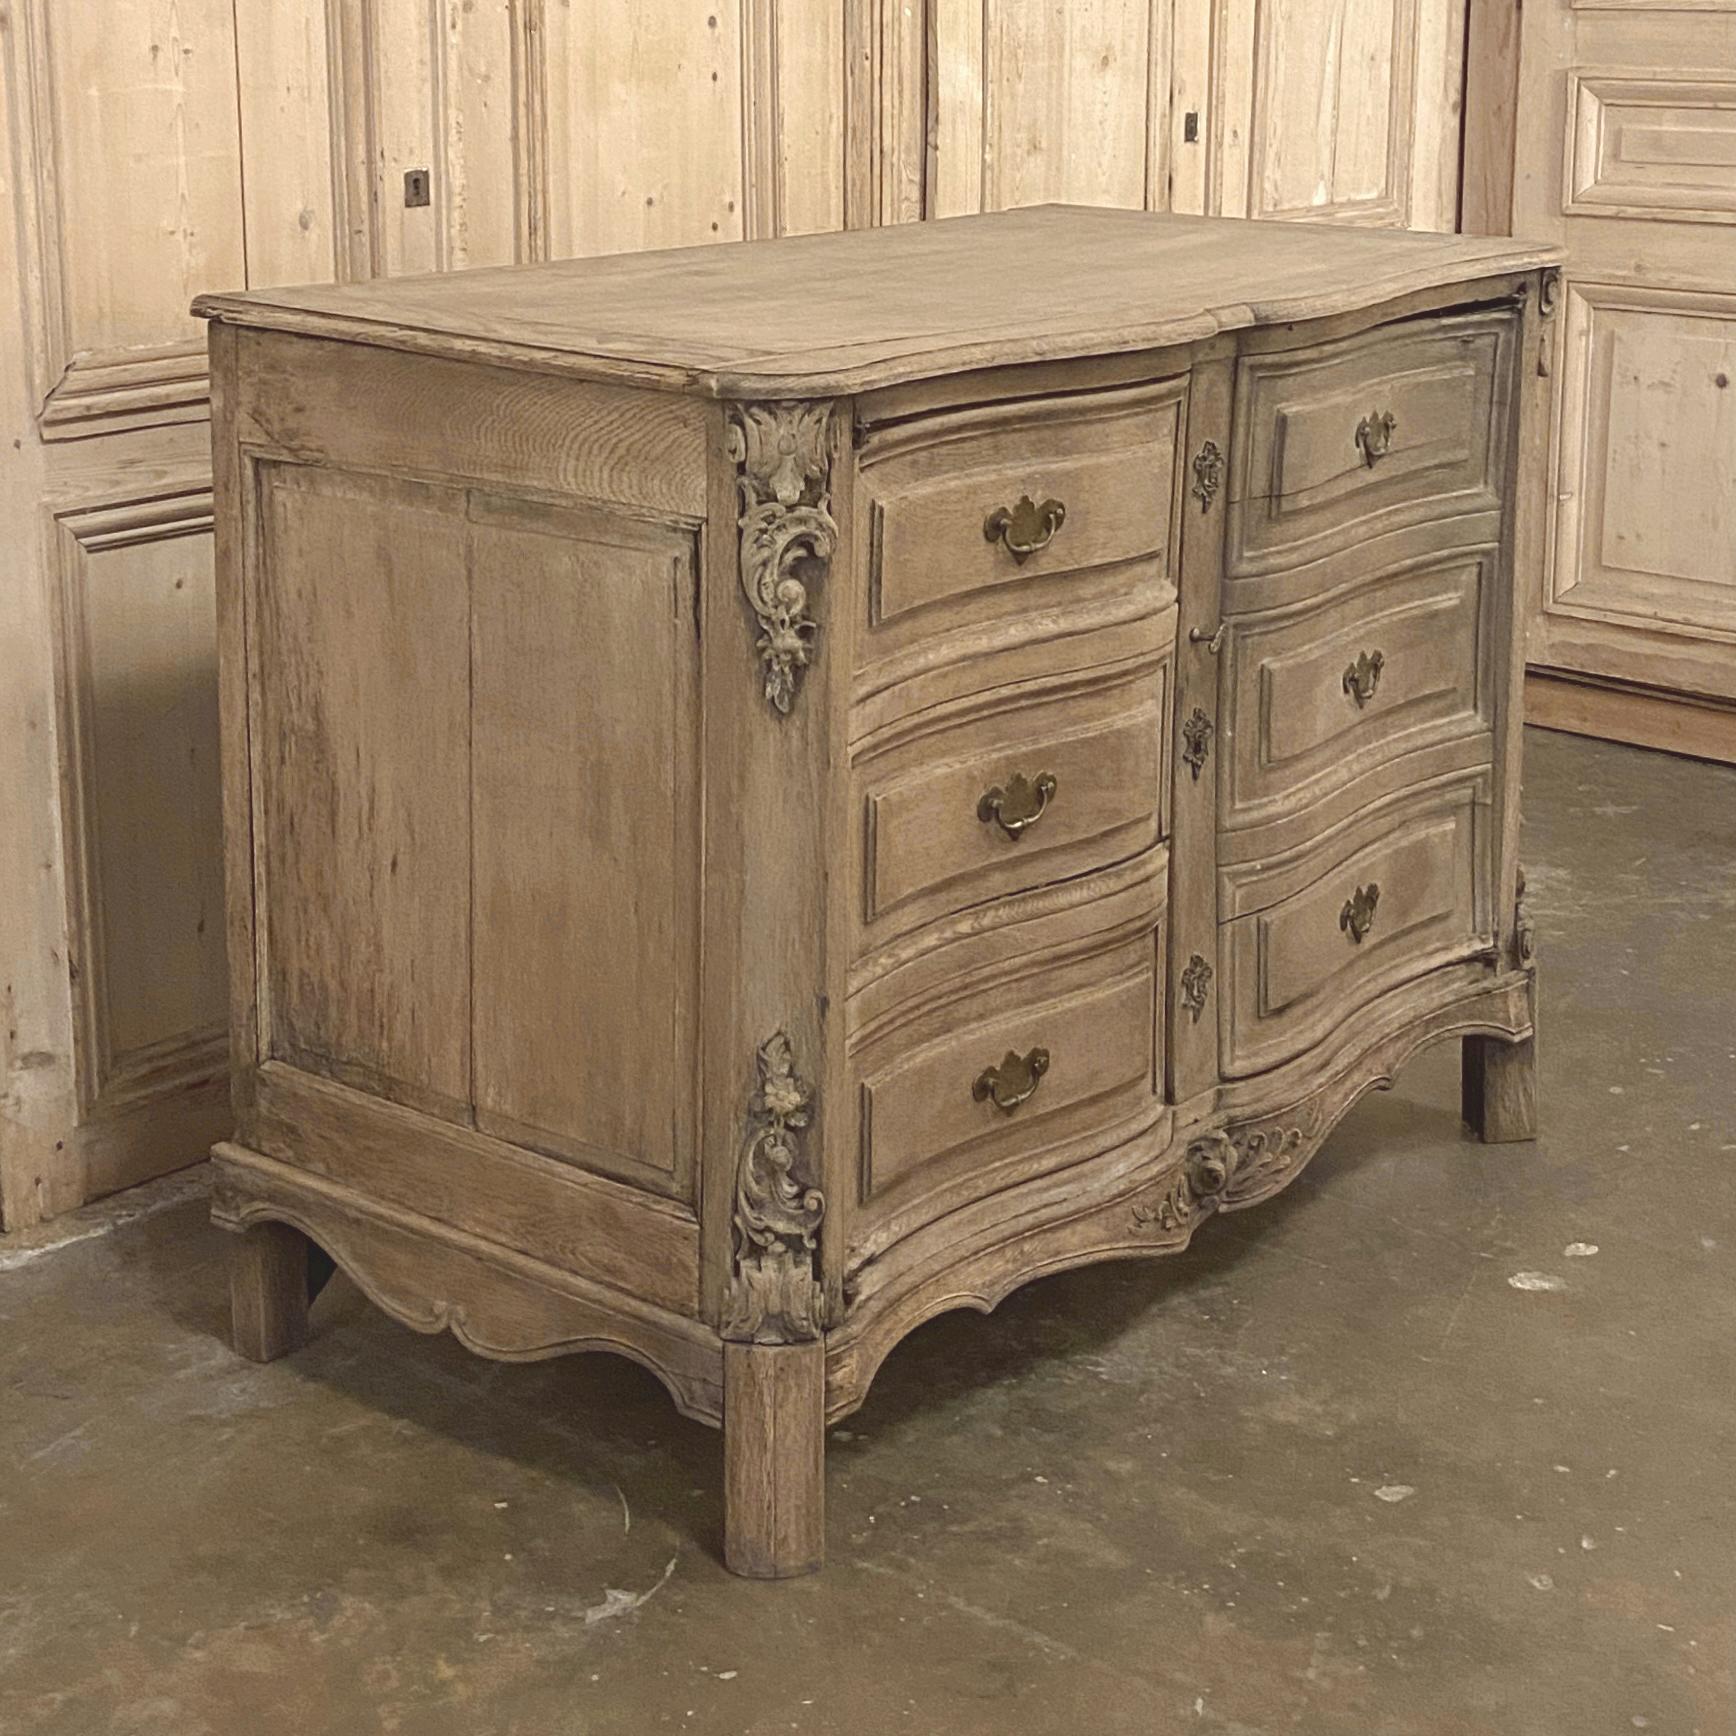 18th century Country French Provincial buffet features an arbalette, or Archer's bow, facade sculpted and embellished from solid oak to last for centuries! Amazingly, it appears to be a commode, but the false facade opens up to reveal a spacious